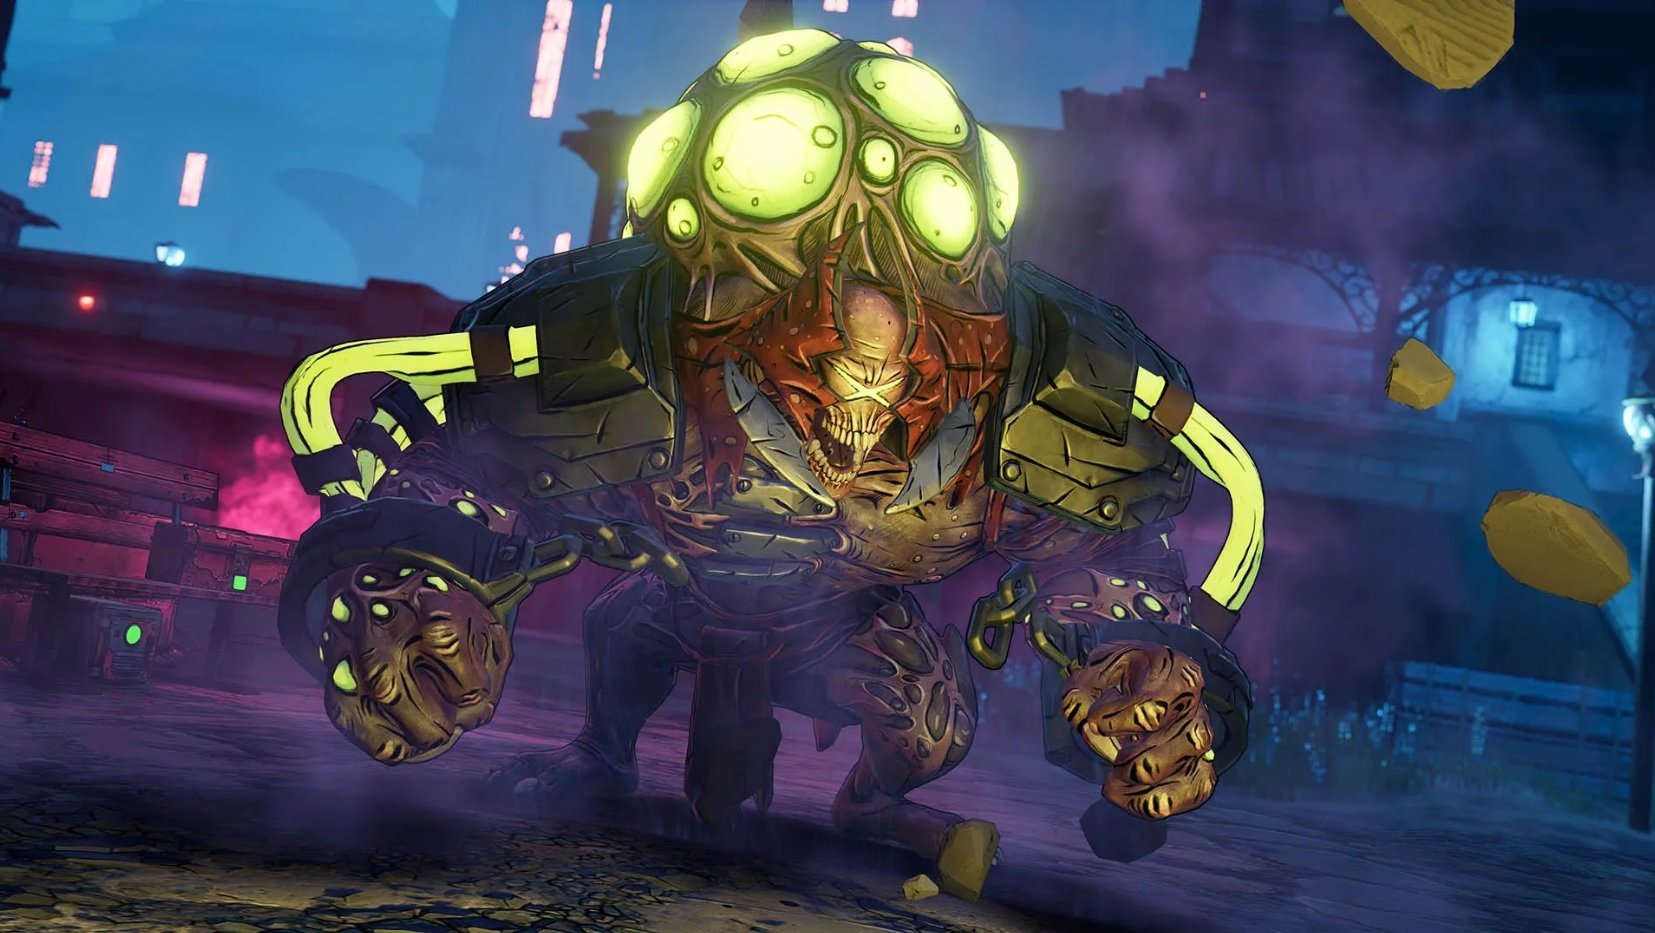 Borderlands 3 and State of Decay 2 on Steam!